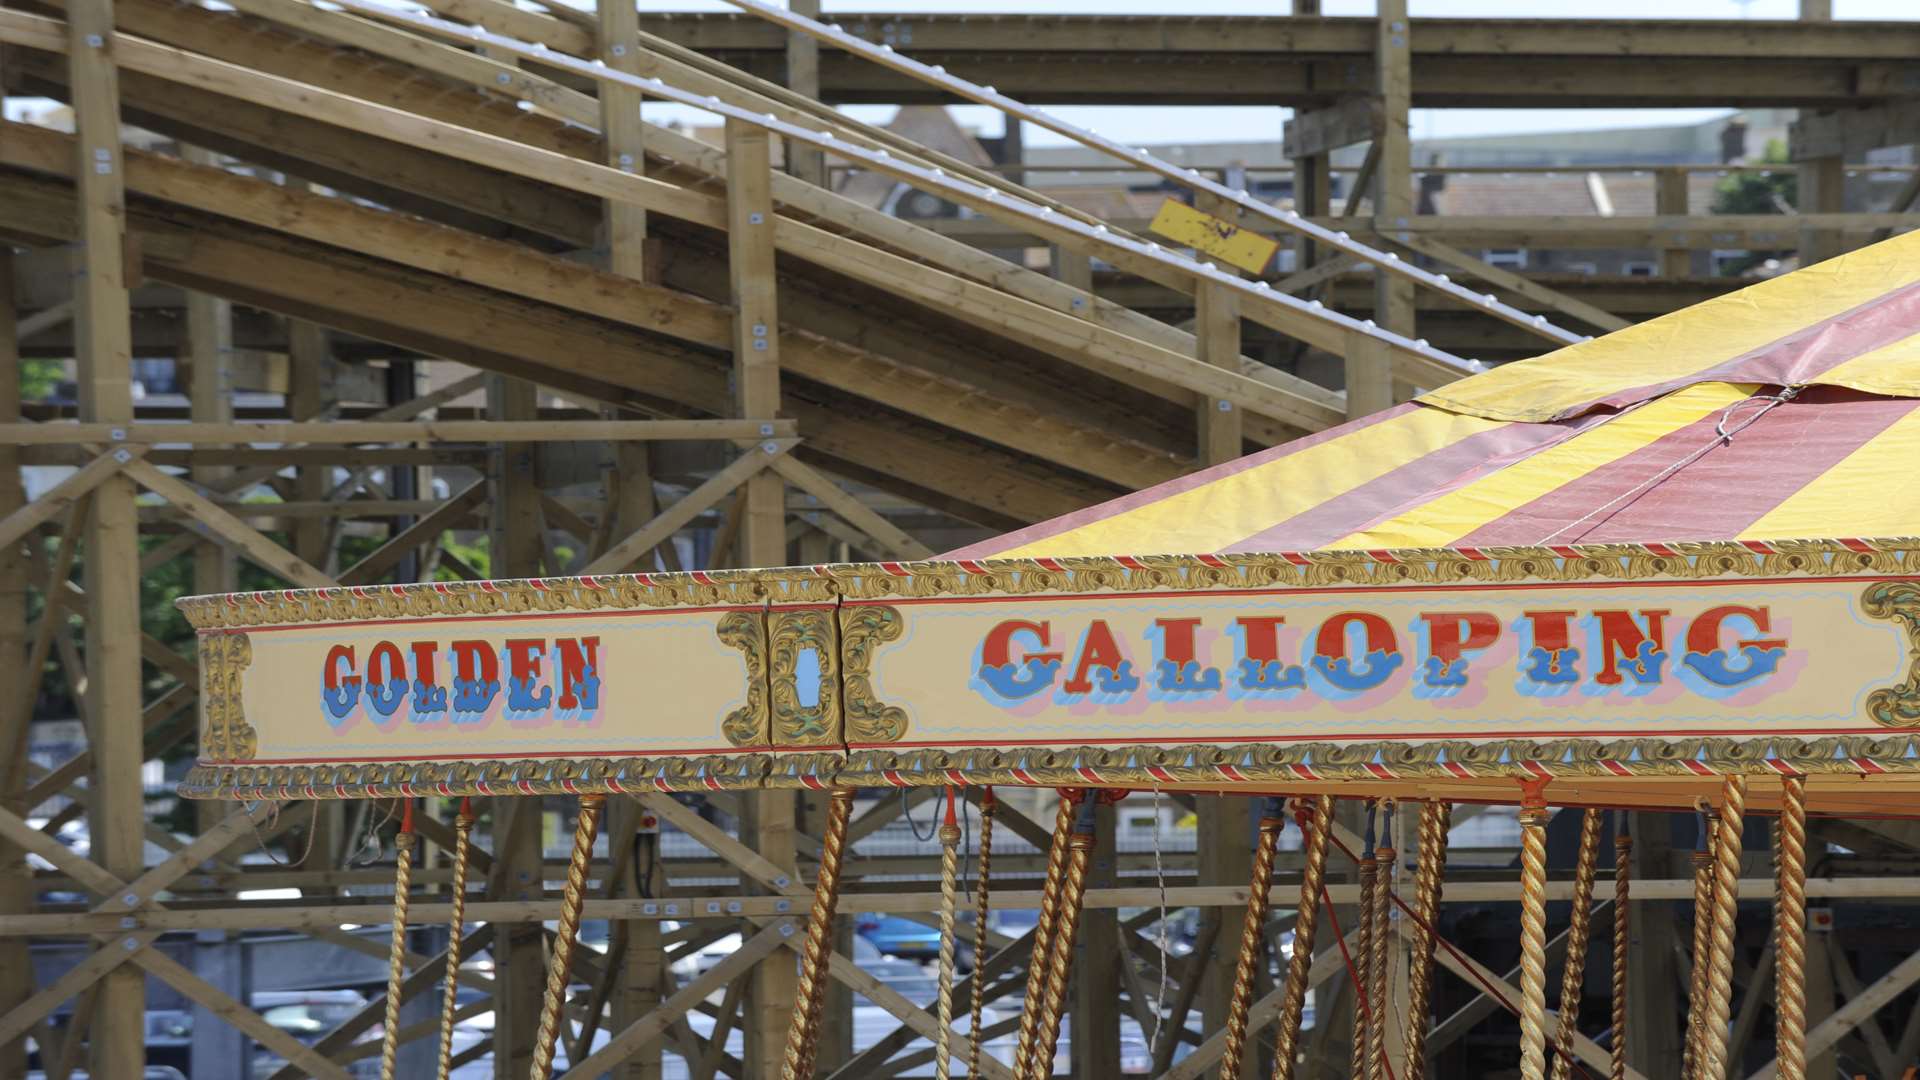 The site on the seafront in Margate is being turned into the country’s first heritage amusement park.